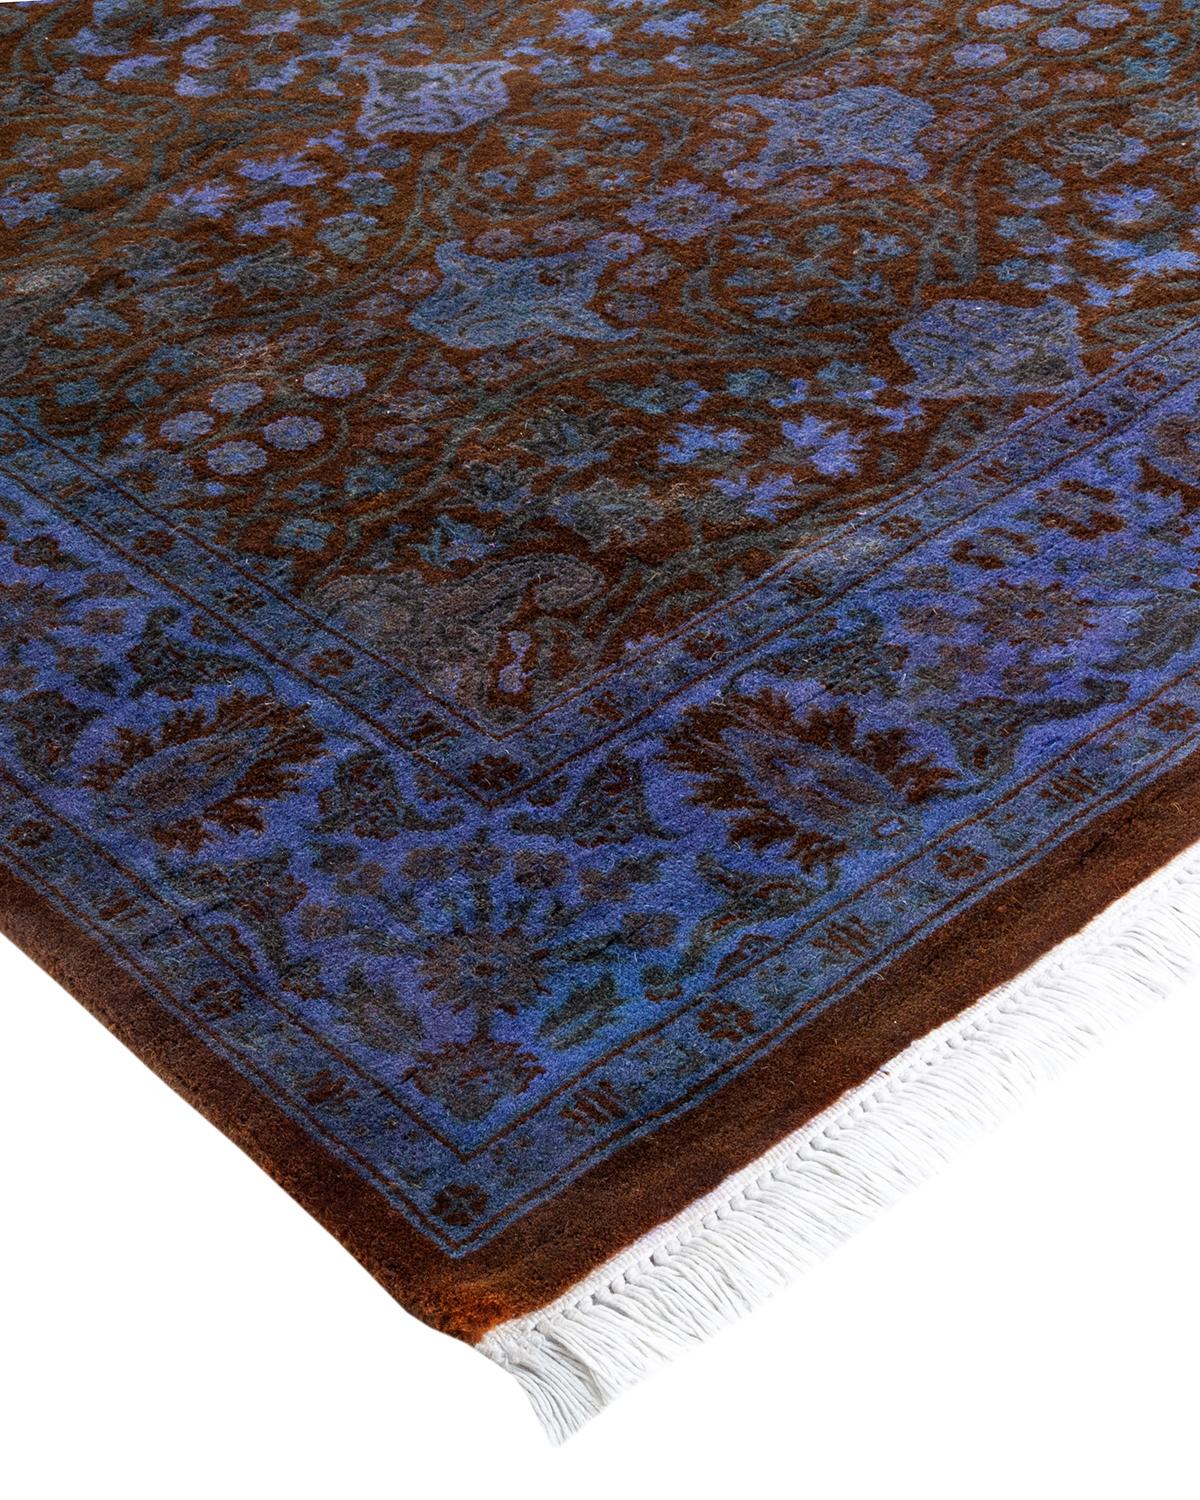 Vibrance rugs epitomize Classic with a twist: Traditional patterns overdyed in brilliant color. Each hand knotted rug is washed in a 100%-natural botanical dye that reveals hidden nuances in the designs. These are rugs that transcend trends, and